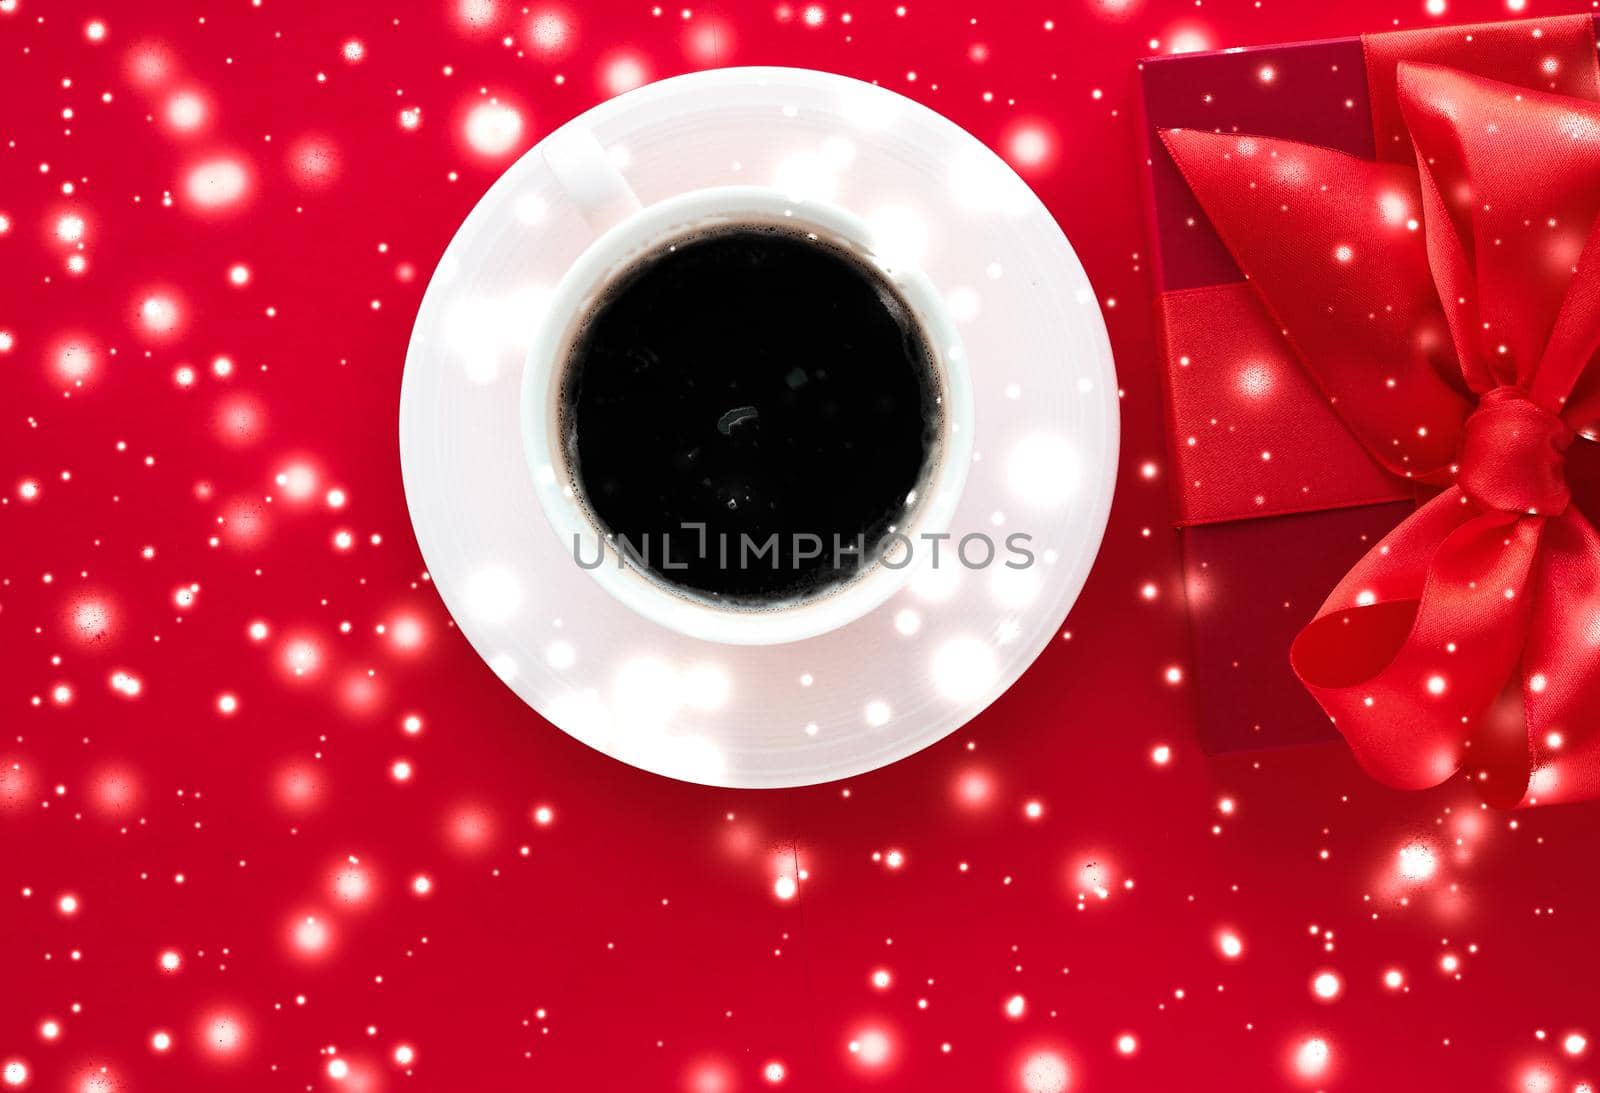 Hot drink, luxury festive menu and Valentines Day card concept - Winter holiday gift box, coffee cup and glowing snow on red flatlay background, Christmas time present surprise